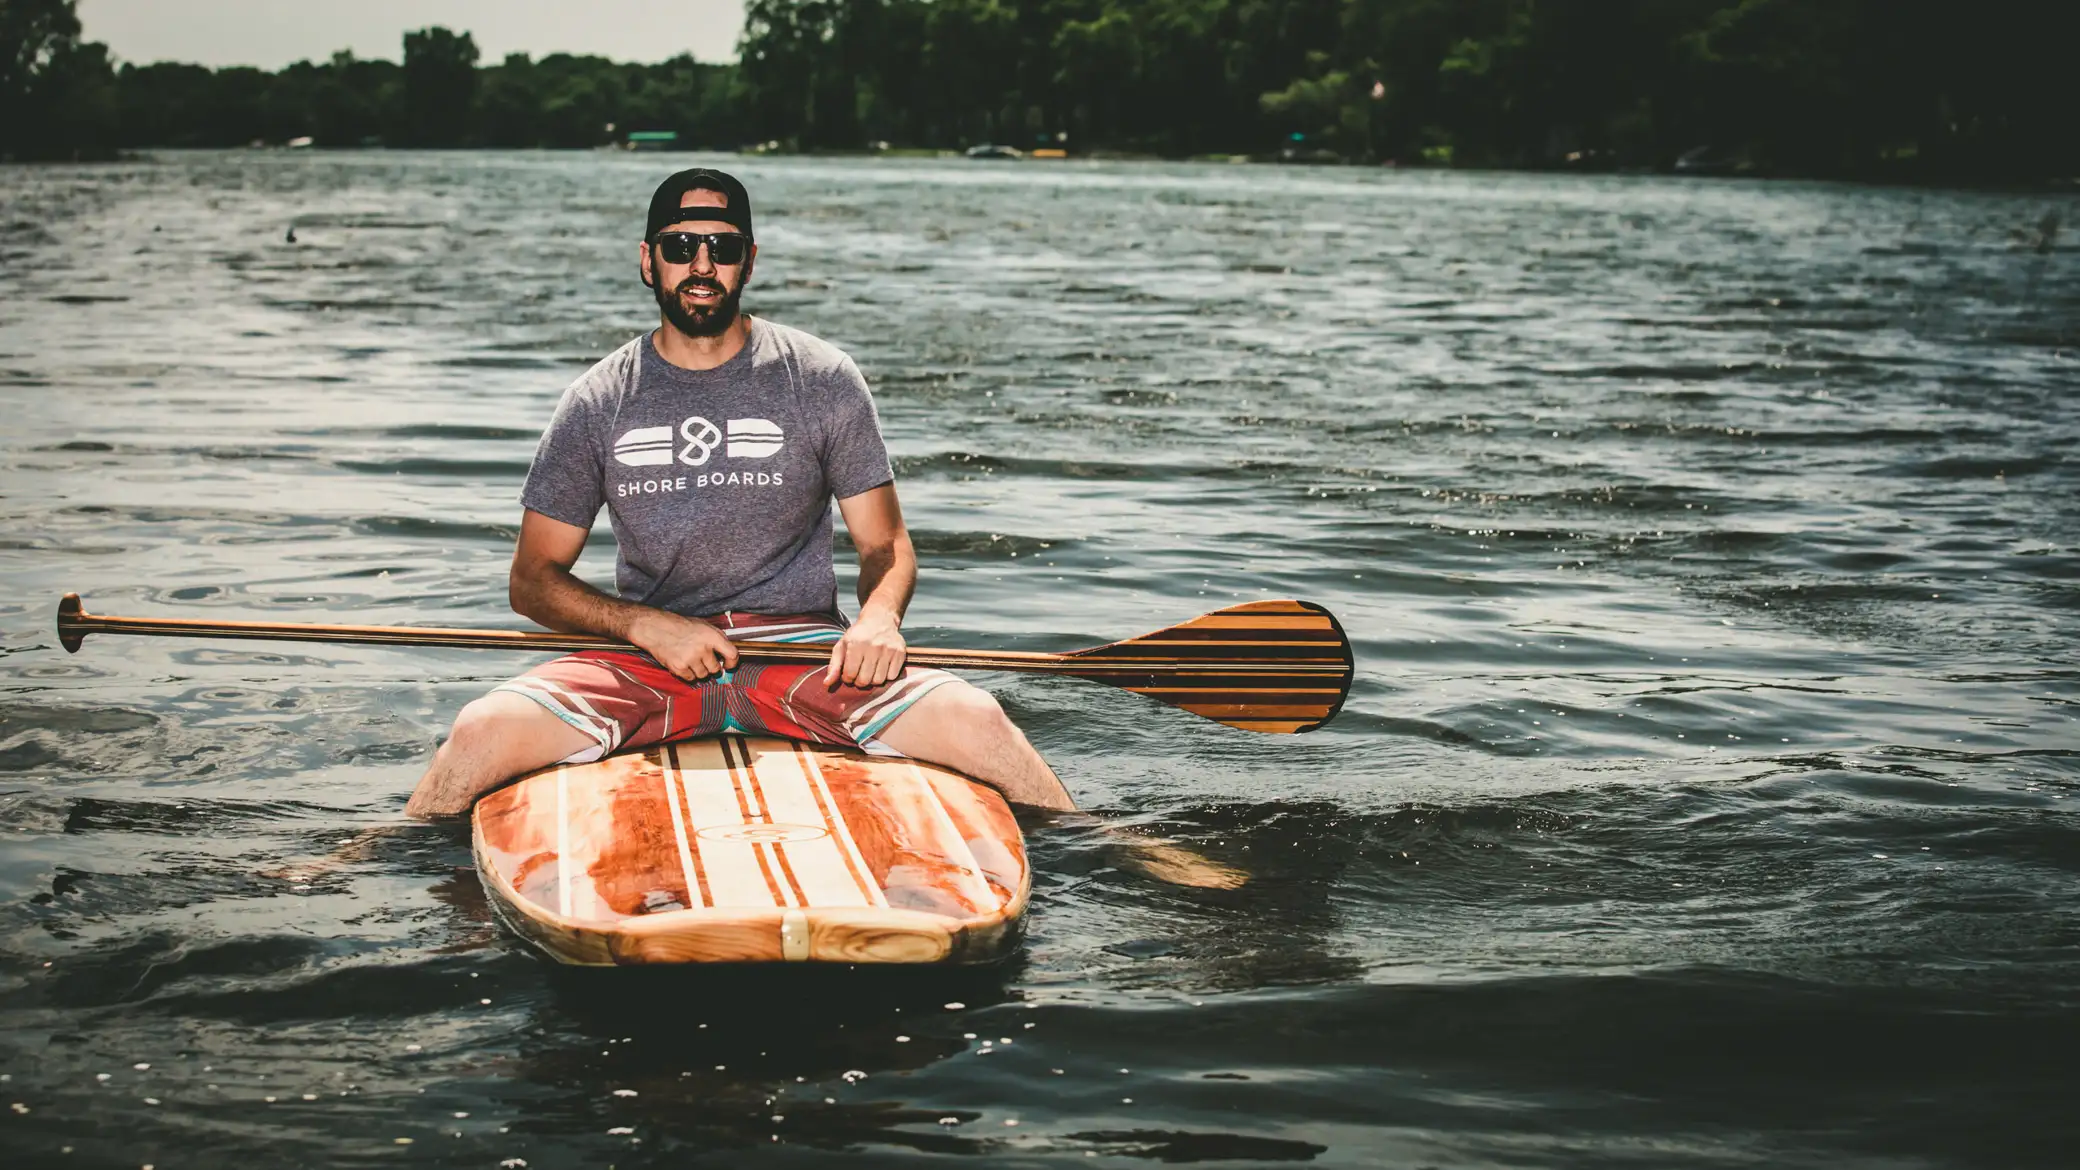 A young man aboard a paddle board in Minnesota.